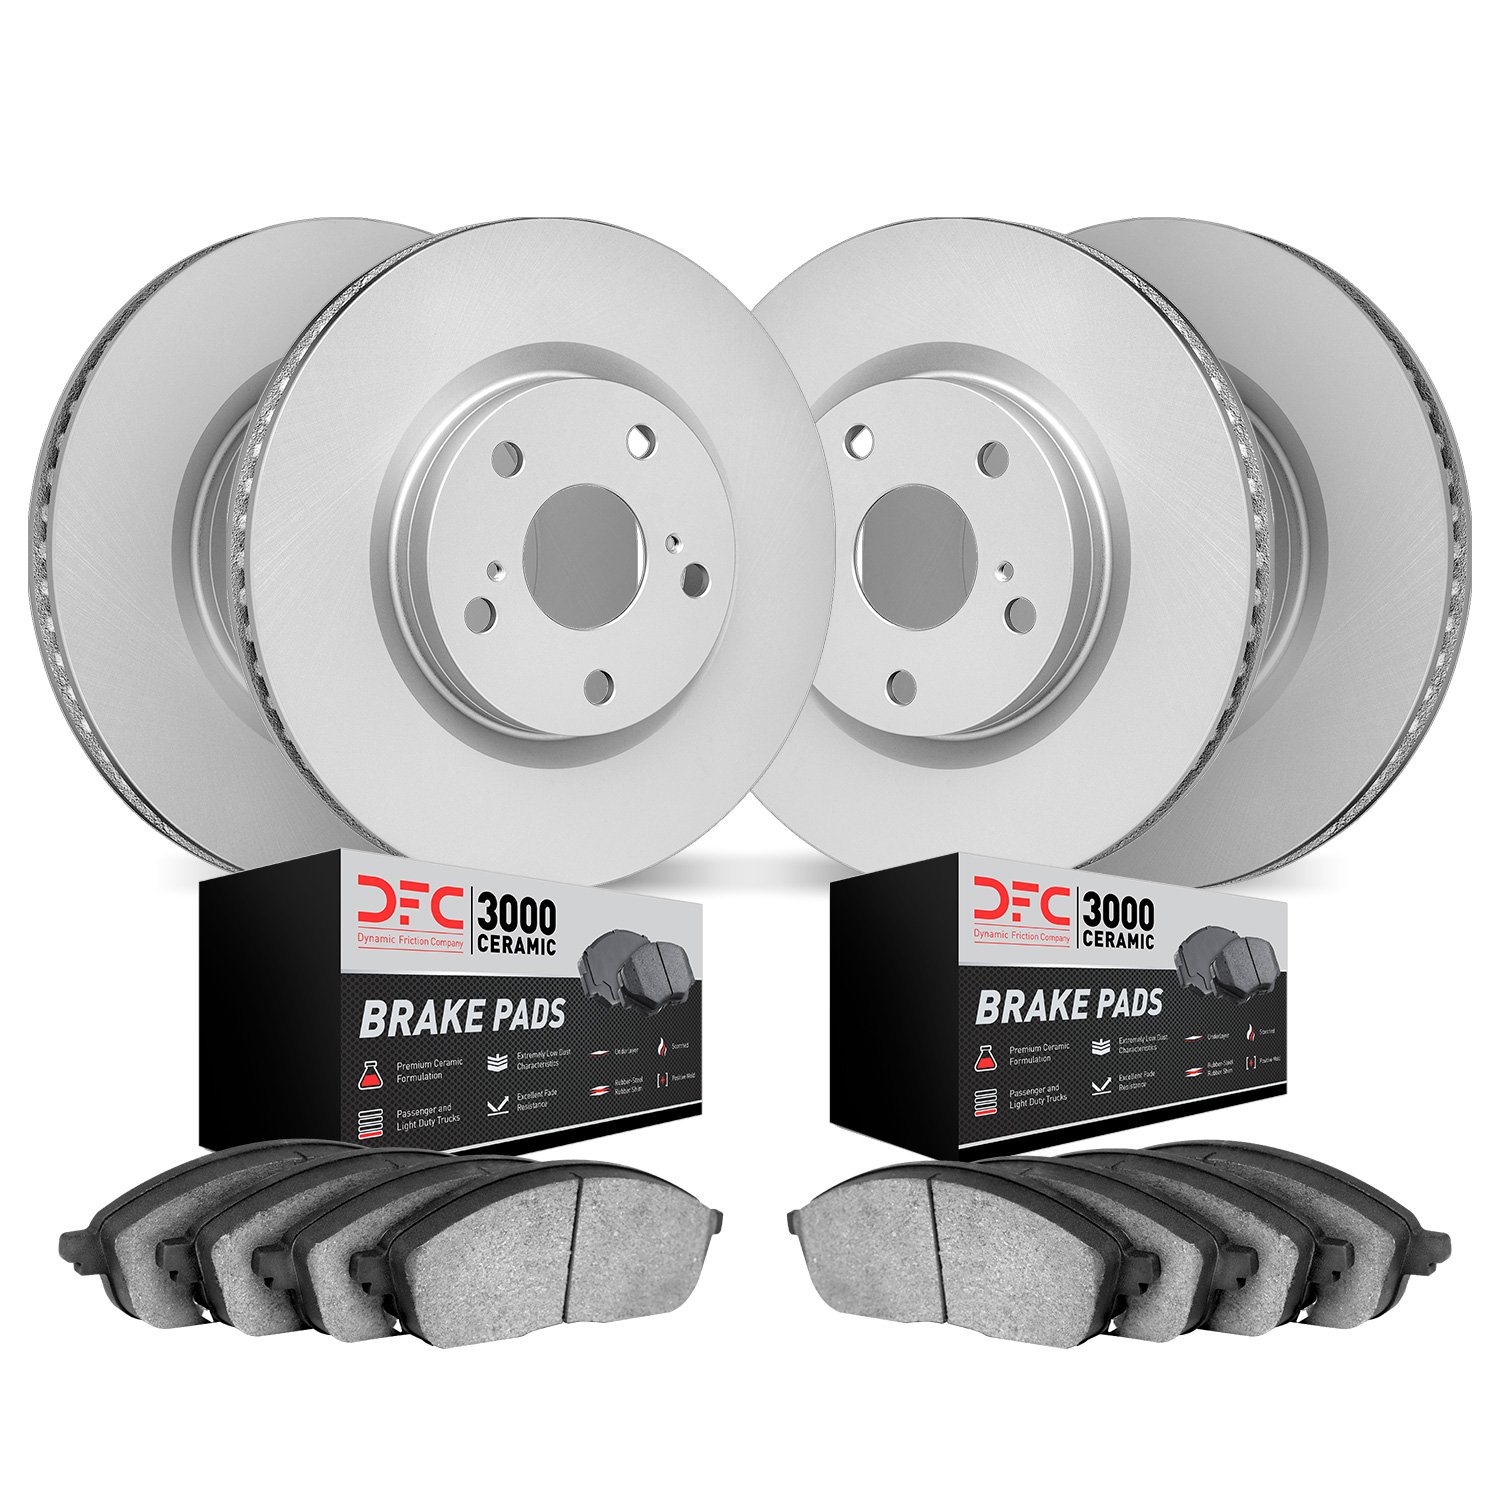 4304-73041 Geospec Brake Rotors with 3000-Series Ceramic Brake Pads Kit, 2012-2018 Audi/Volkswagen, Position: Front and Rear